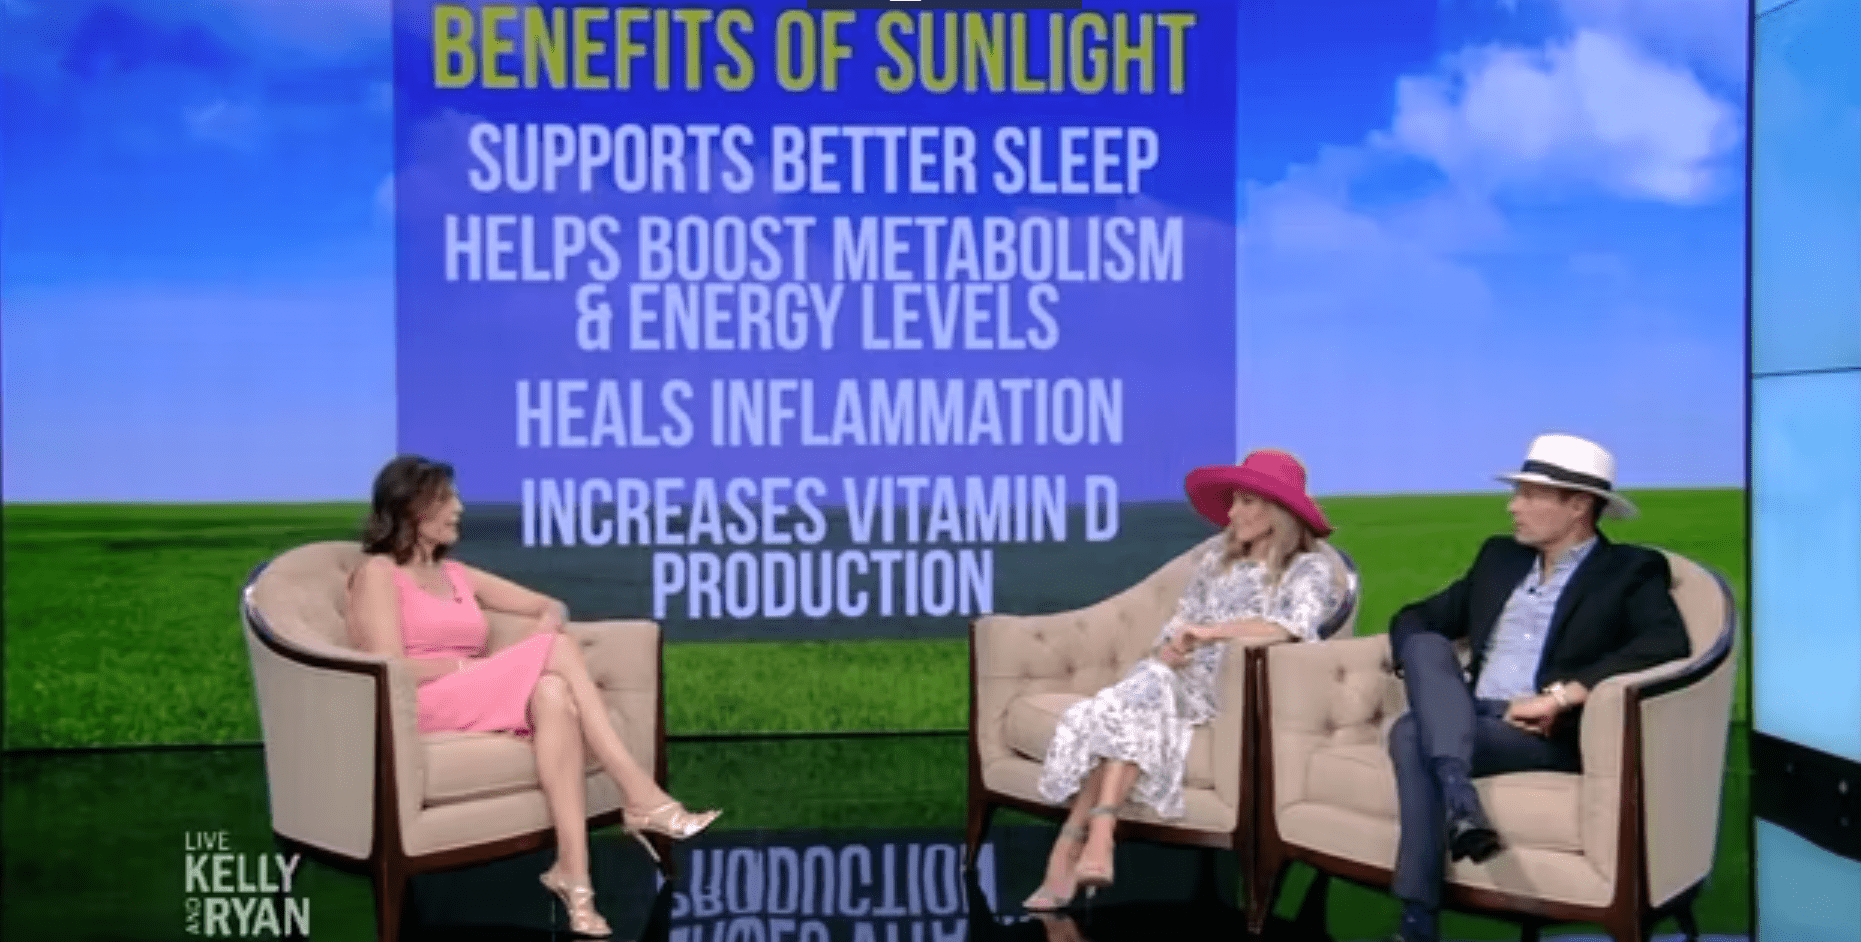 LIVE with Kelly & Ryan - Sun Benefits